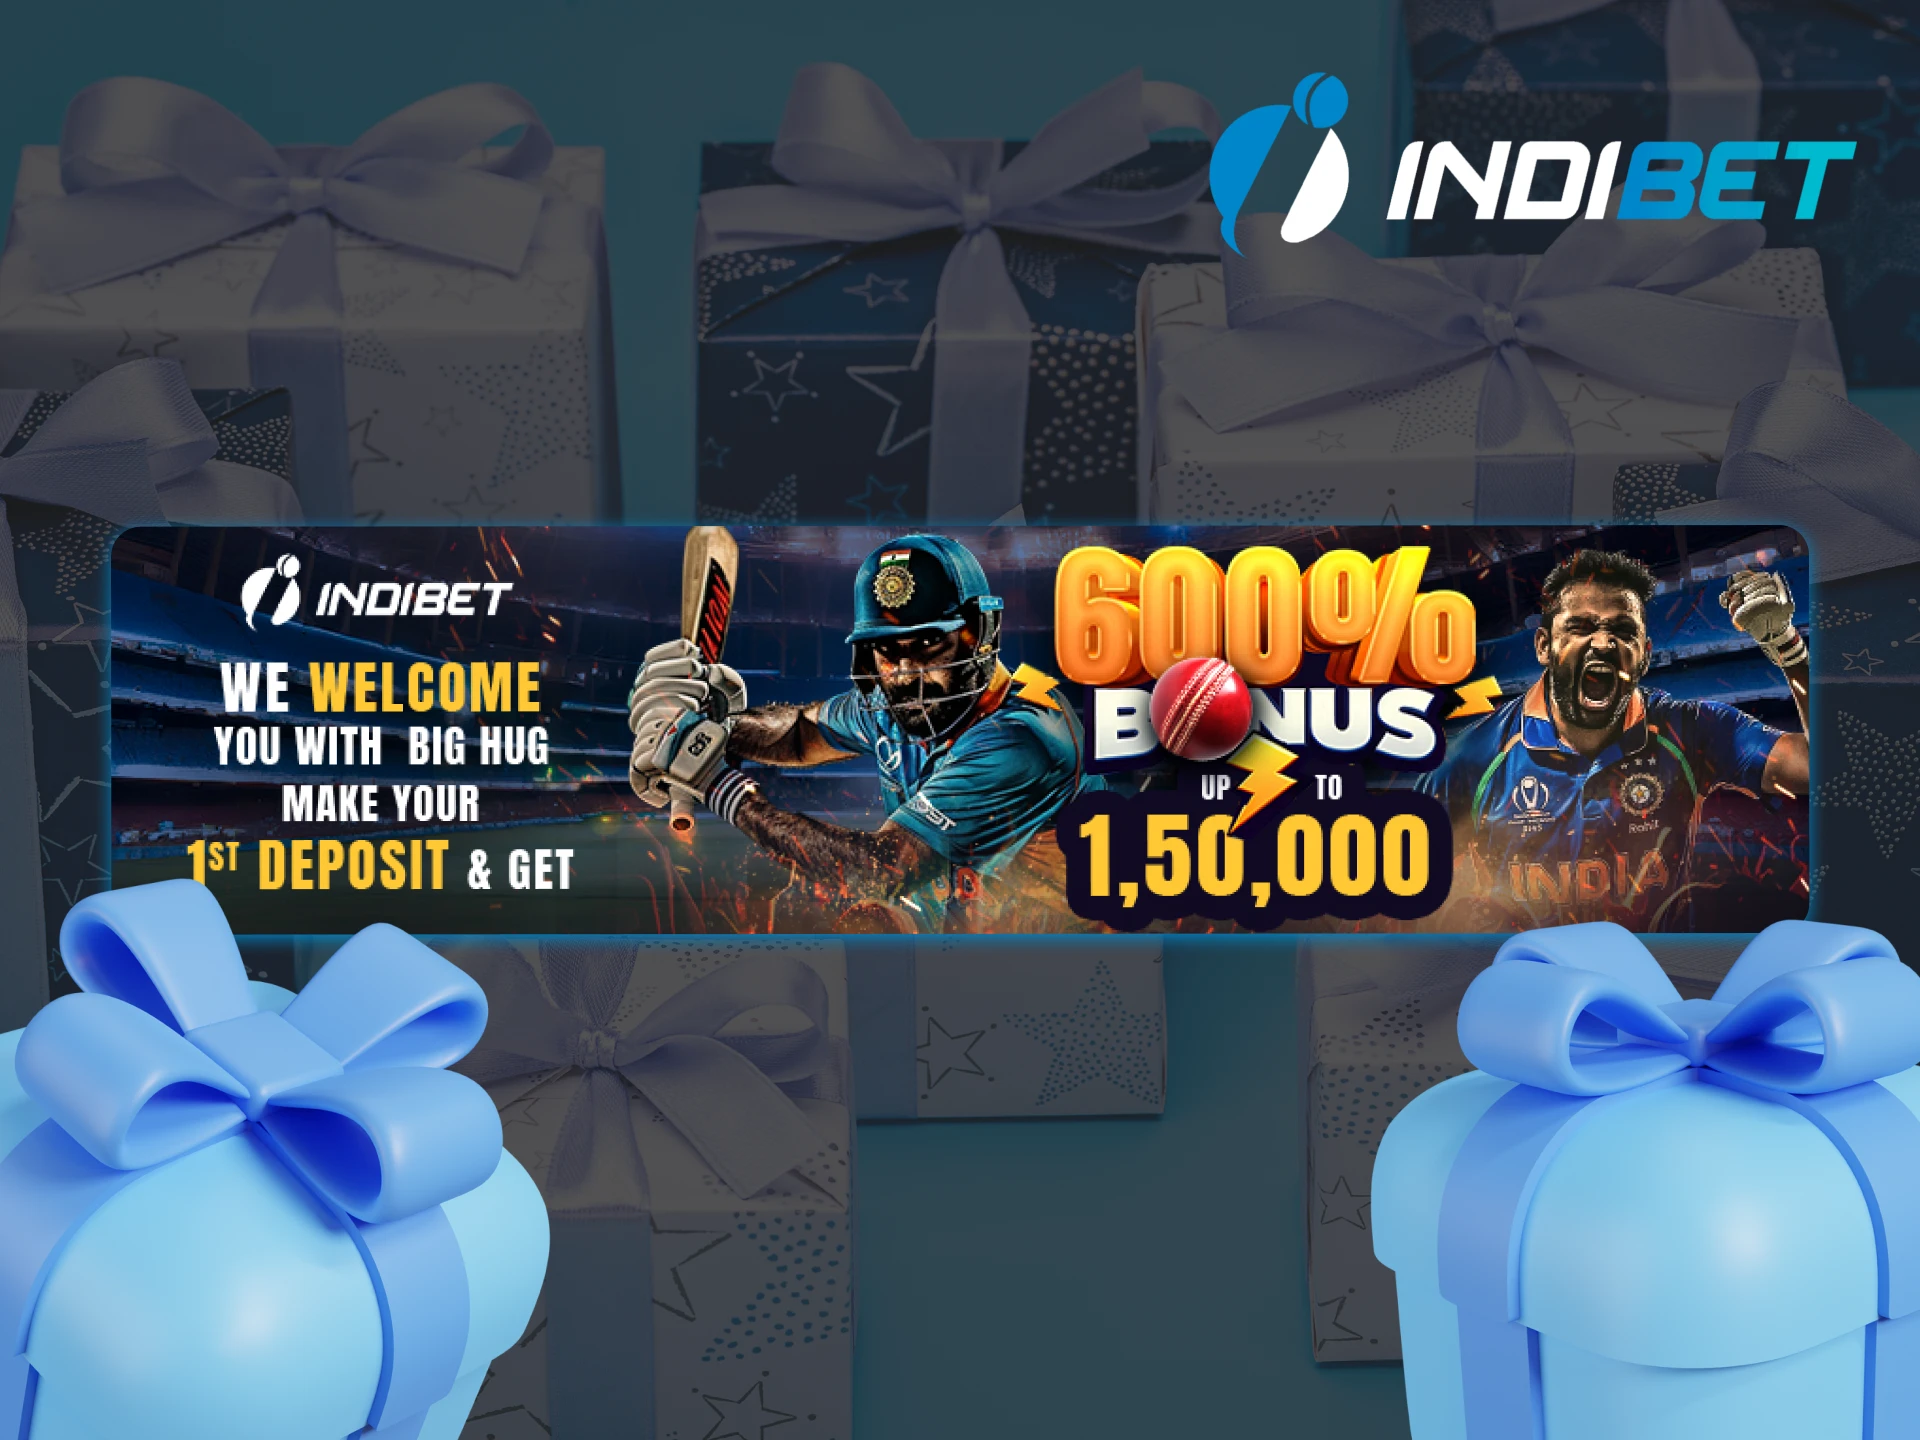 By registering with Indibet, you can receive a welcome bonus on both sports, live casino and indie games.